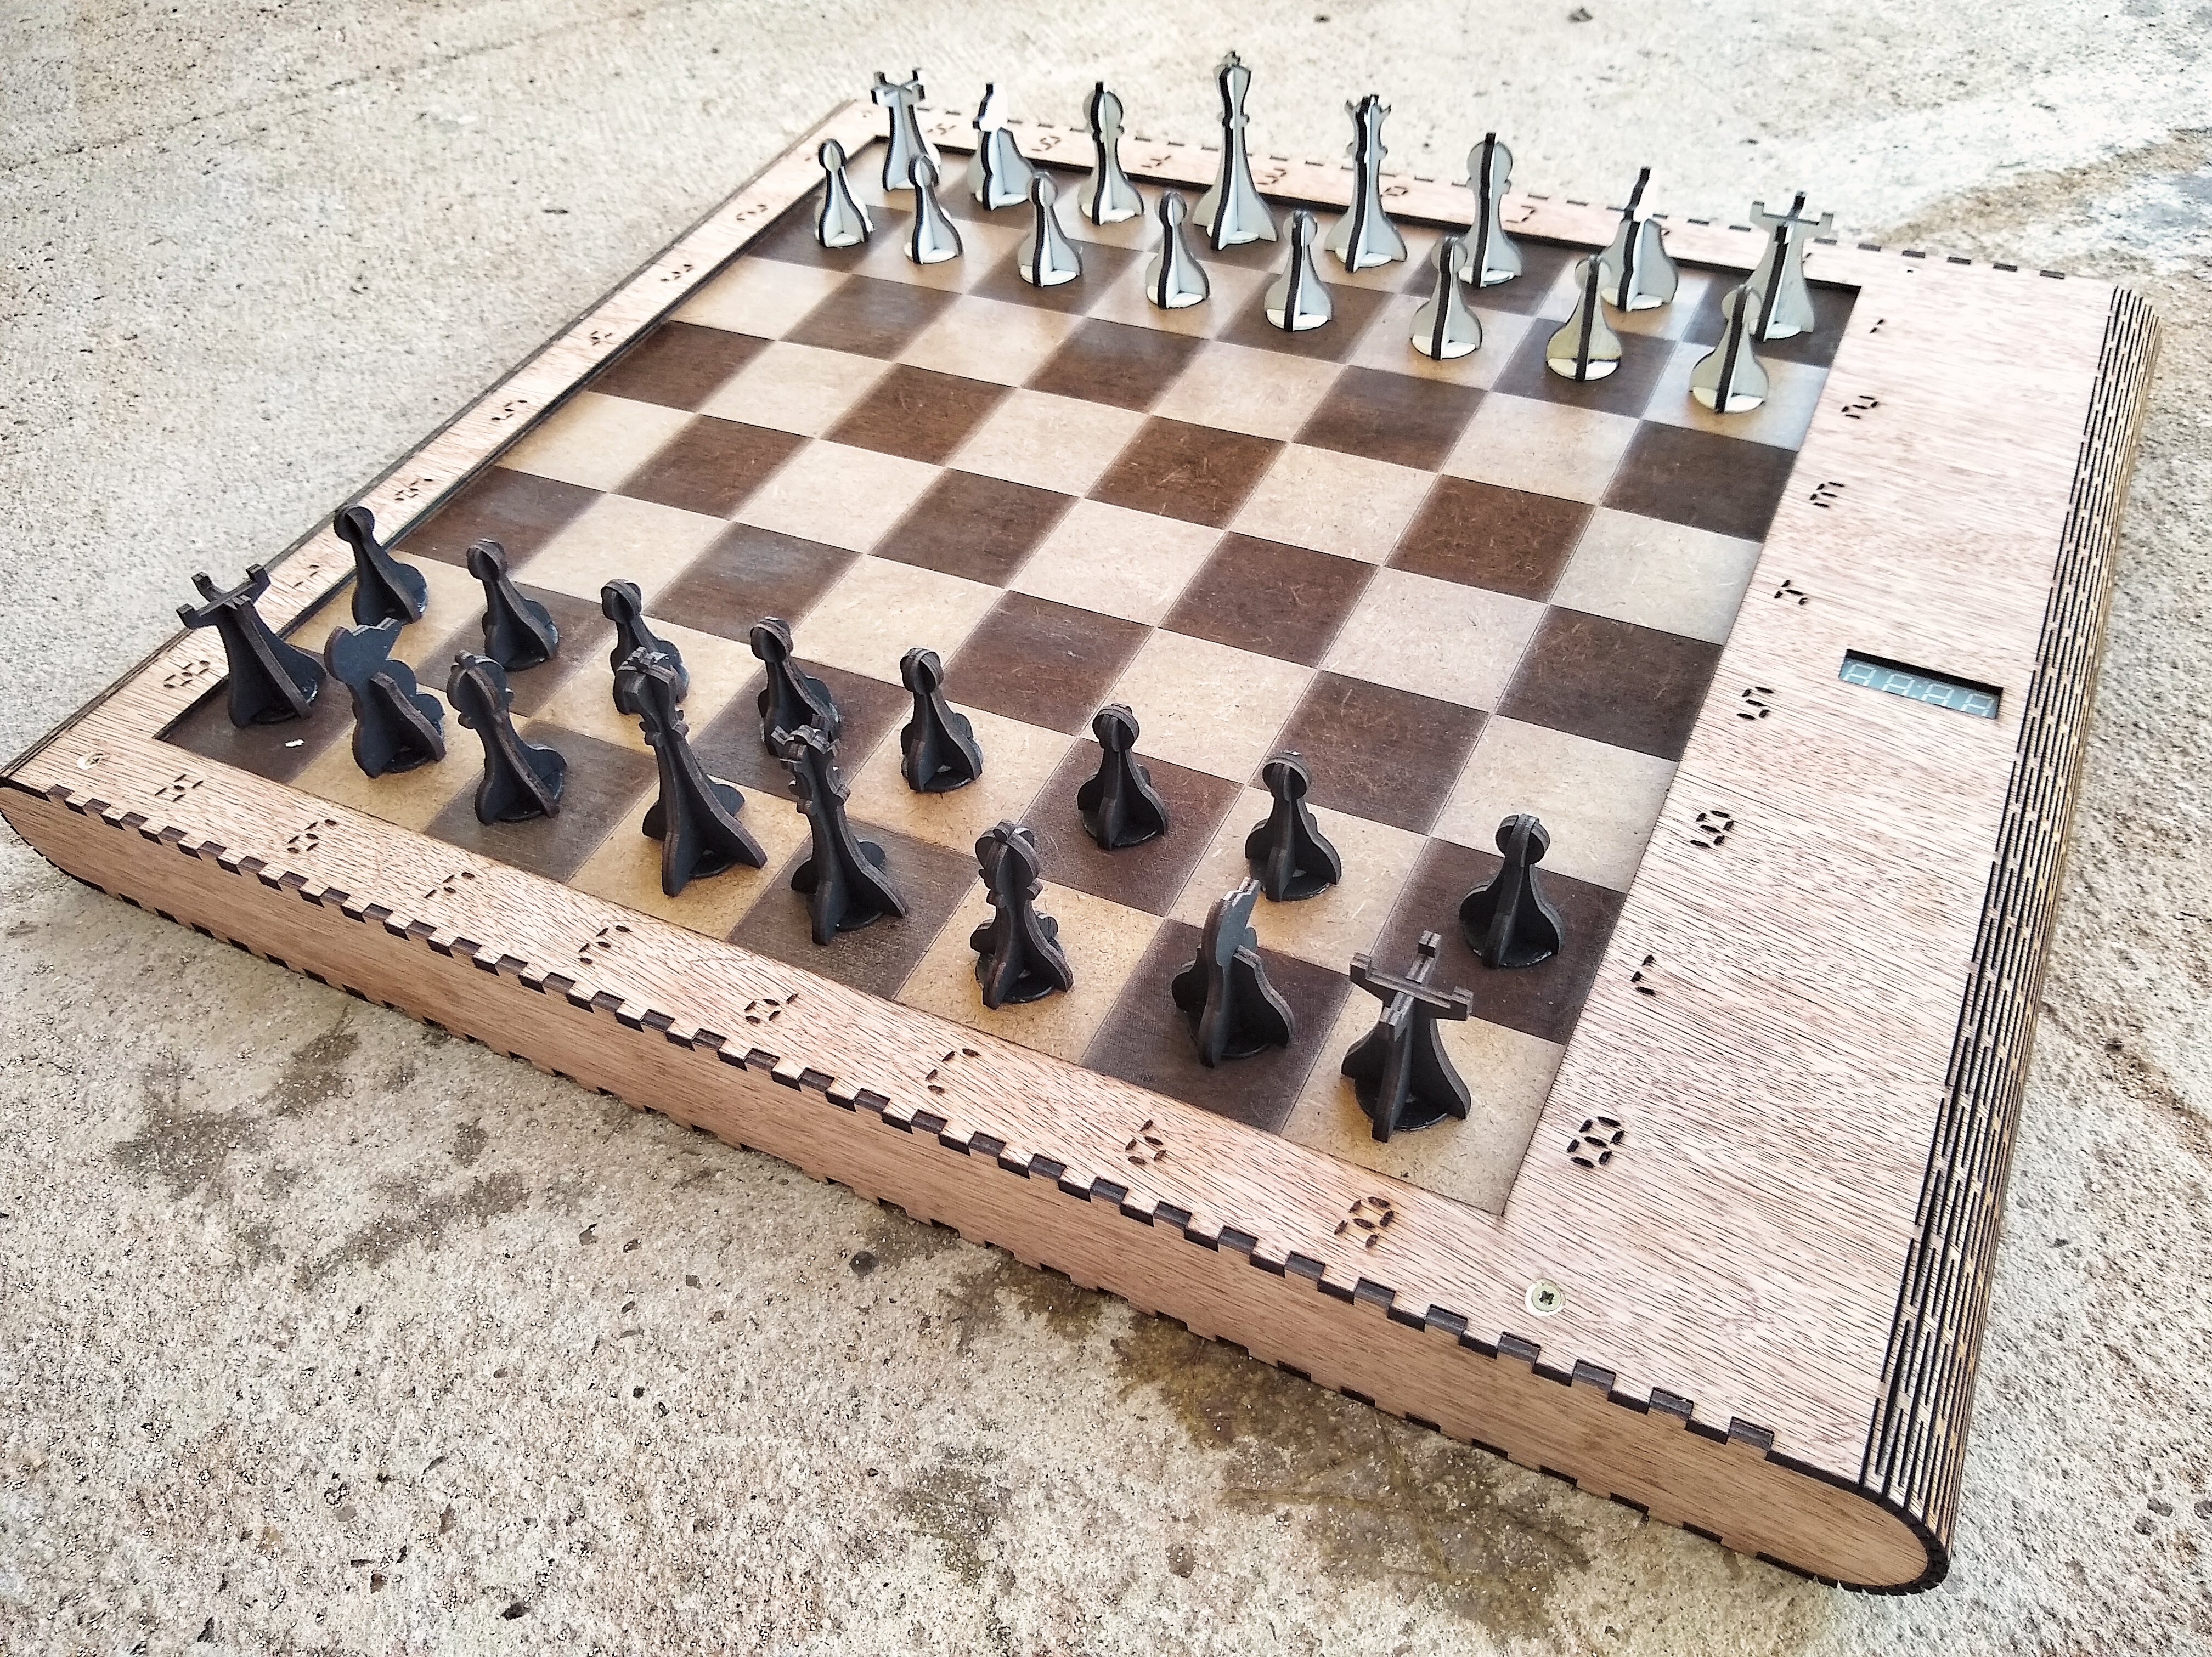 chessboard final picture